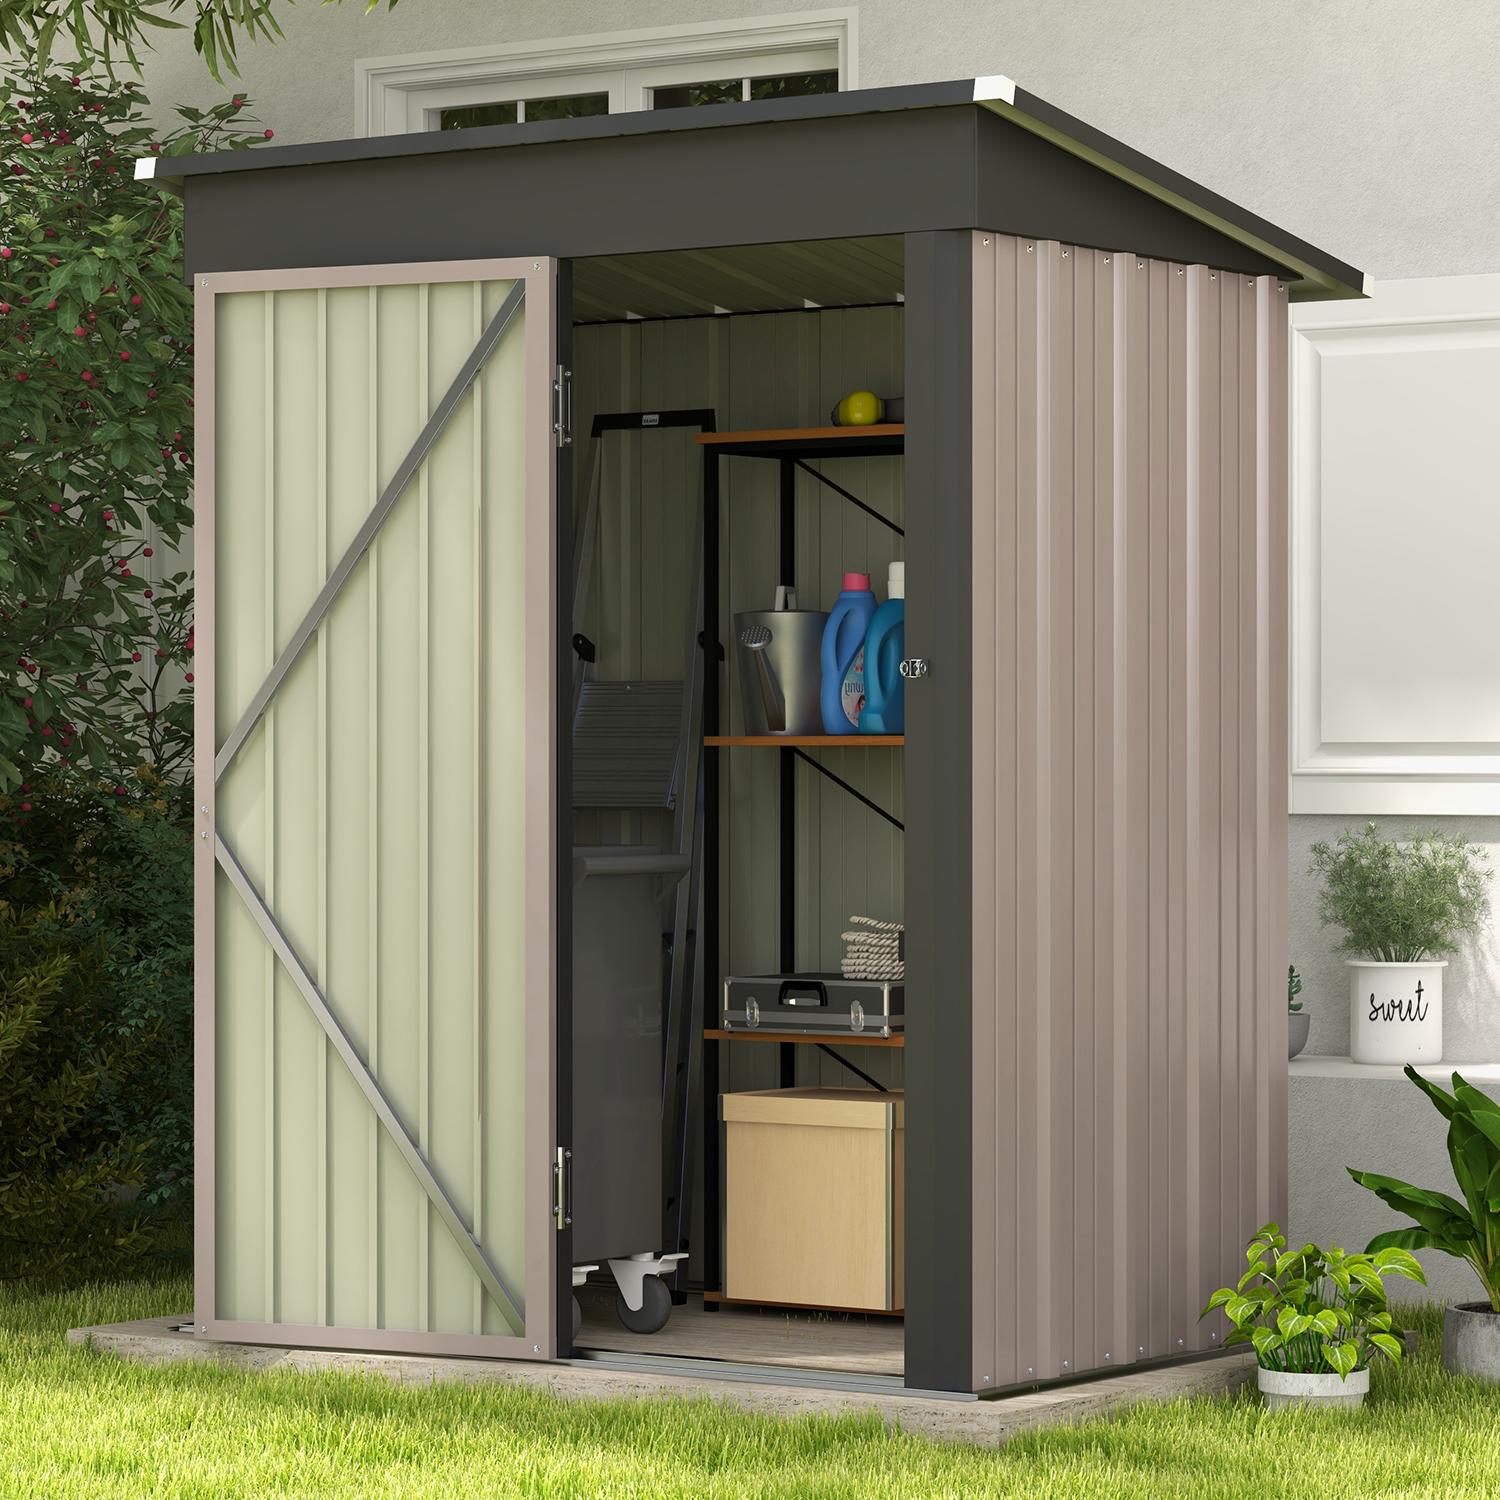 Patiowell Classic 5' x 3' Outdoor Storage Shed Metal Shed with Sloping Roof and Lockable Door, Brown - image 1 of 13